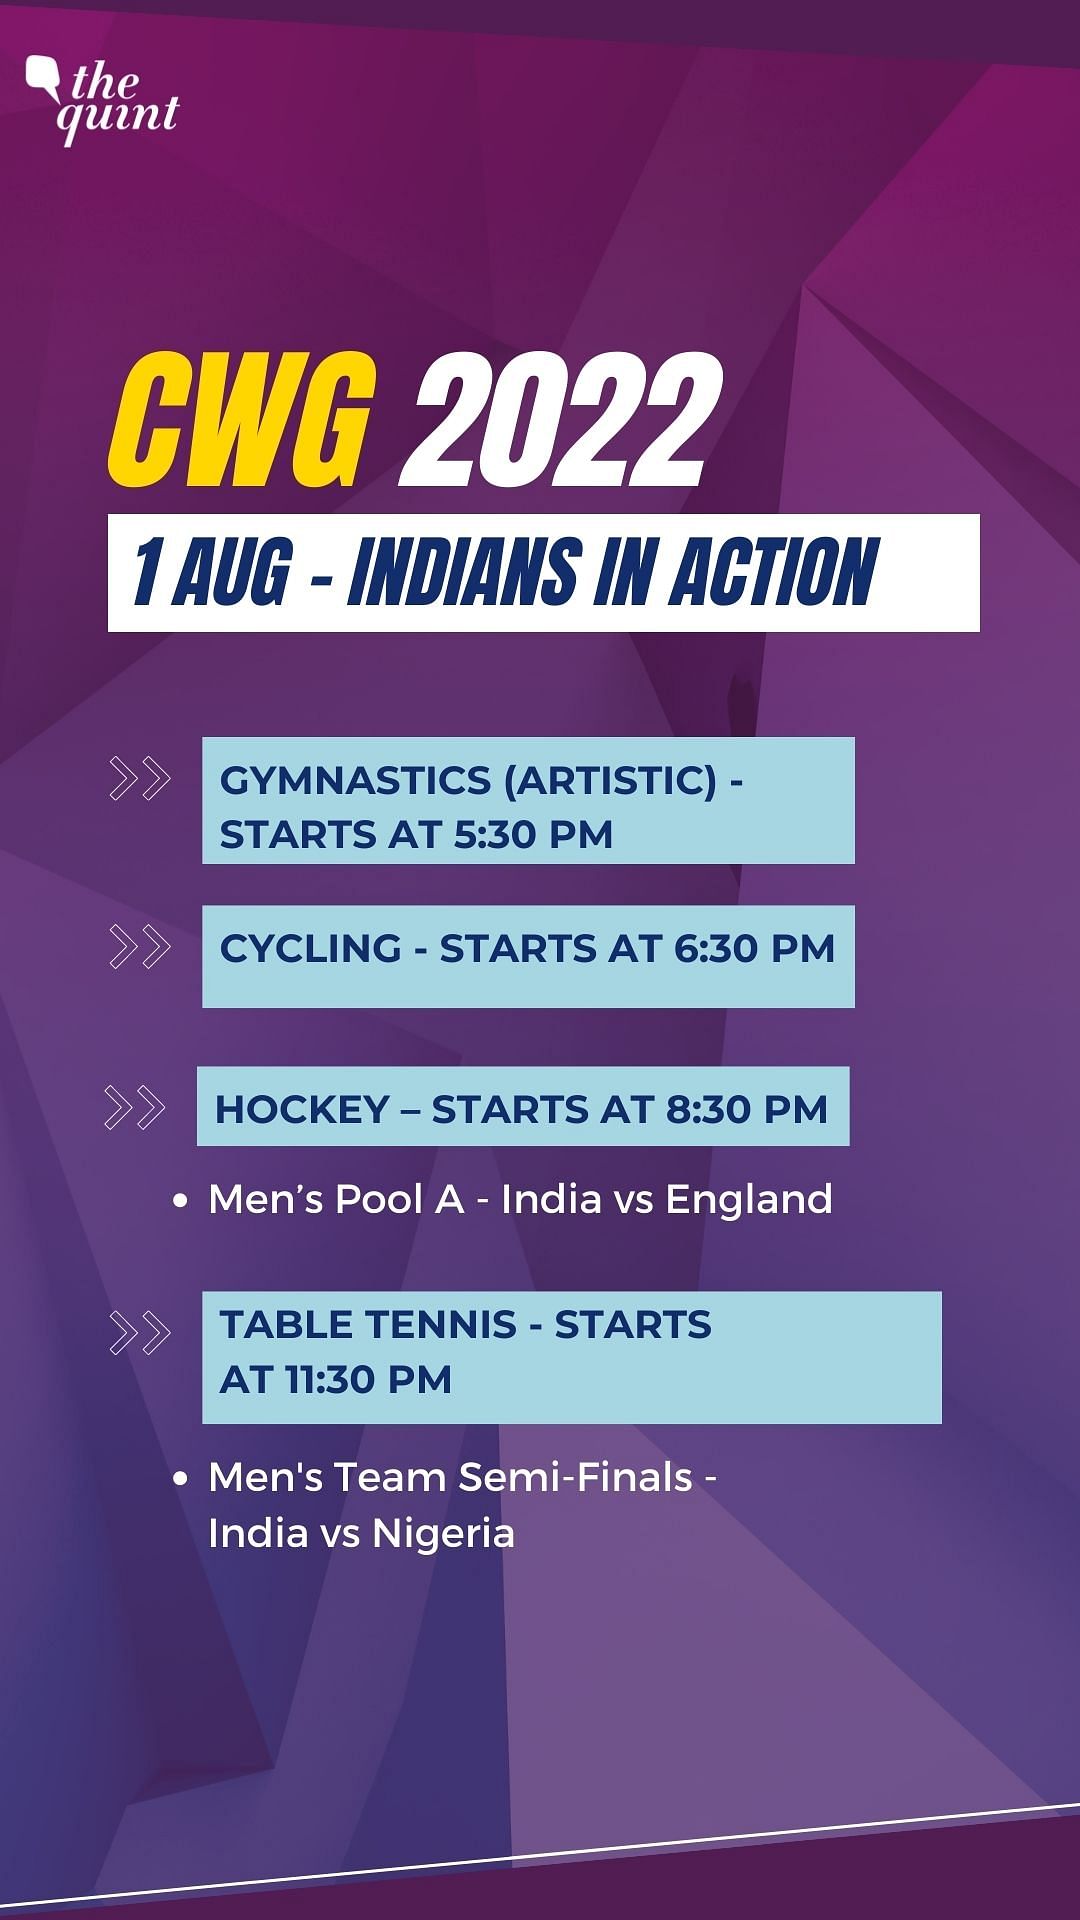 The Indian Men’s Hockey team will square off against England on Day 4 of CWG 2022.